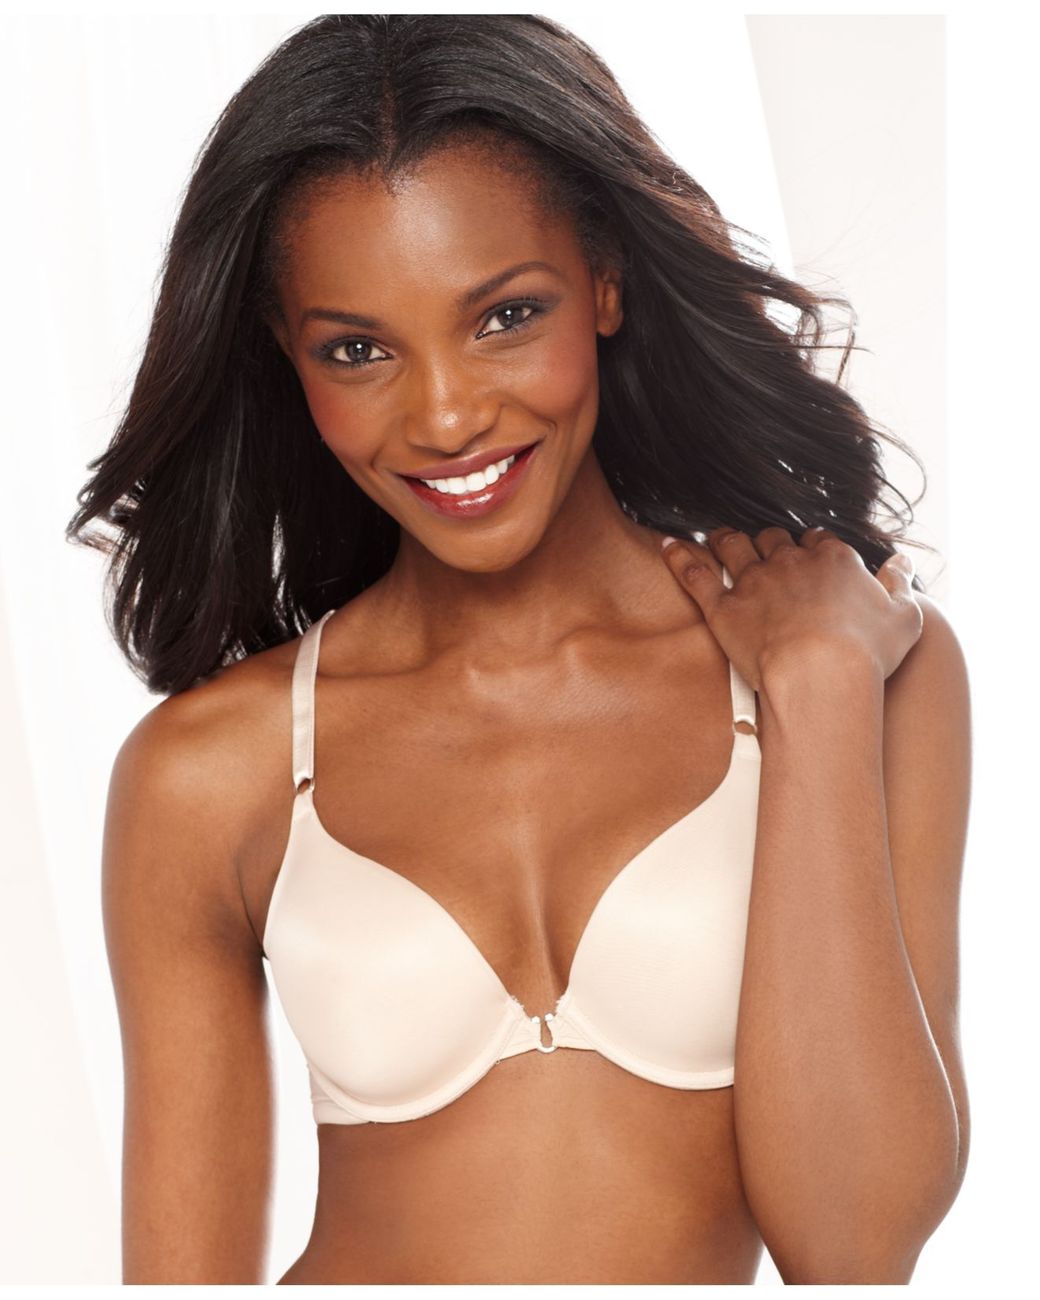 Lily Of France Royal Blue Push Up Bra Size undefined - $23 - From Carla